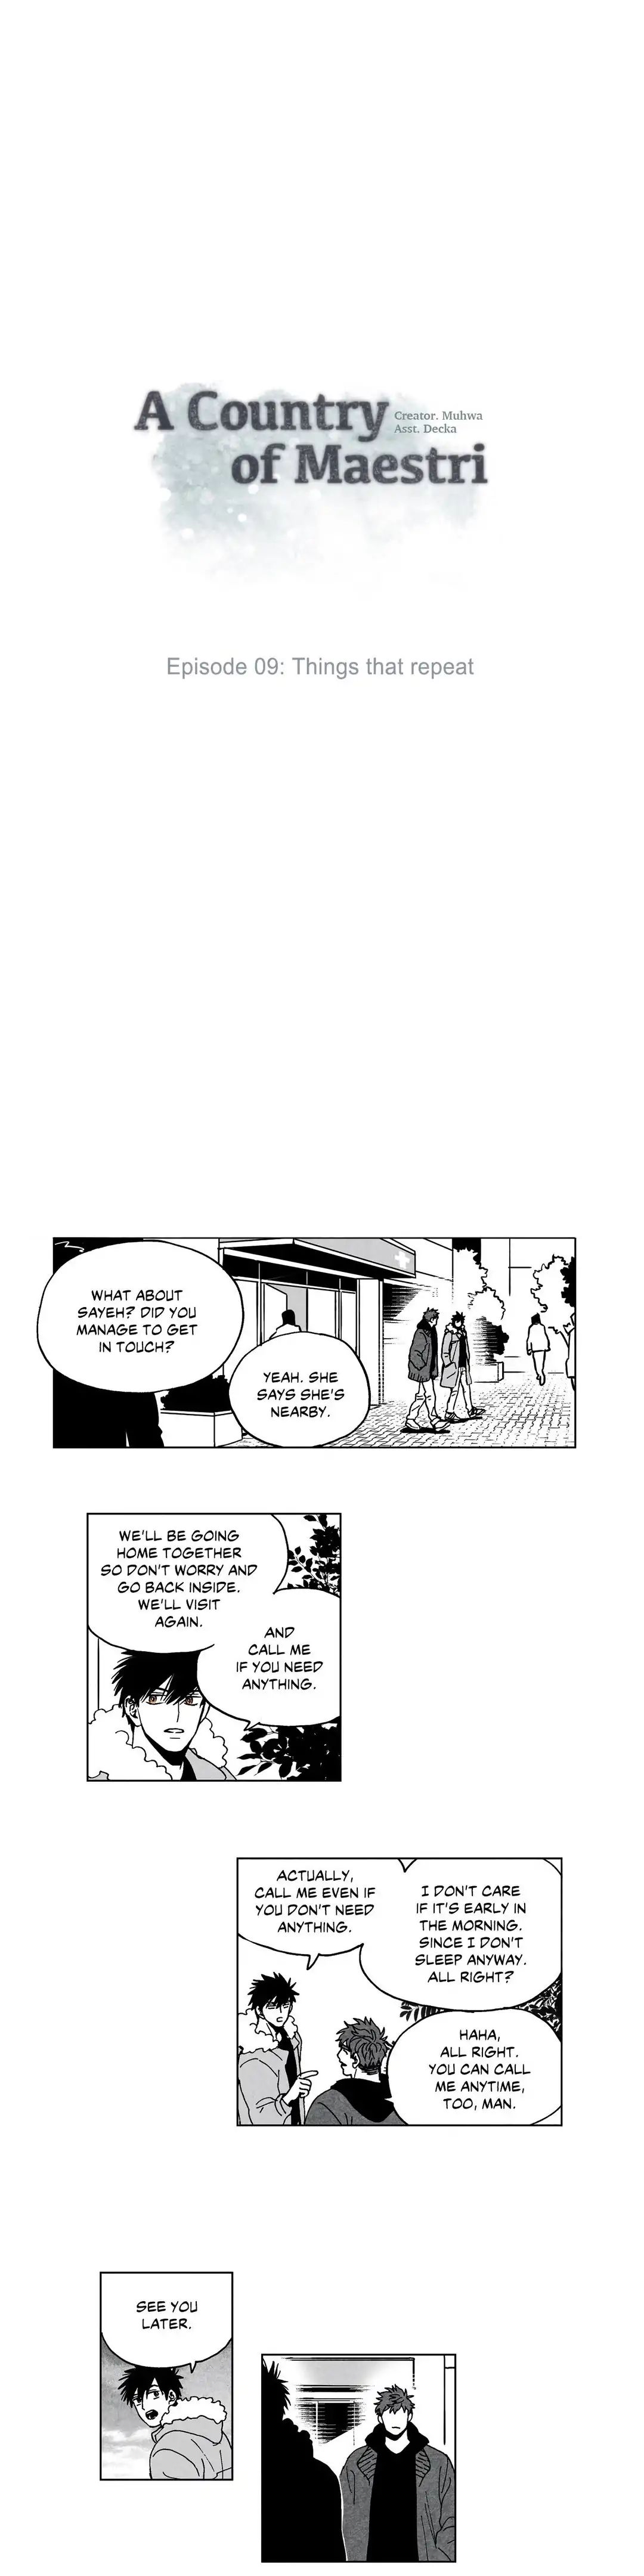 A Country Of Maestri Chapter 139: Chapter 09: Things That Repeat (18) - Picture 1